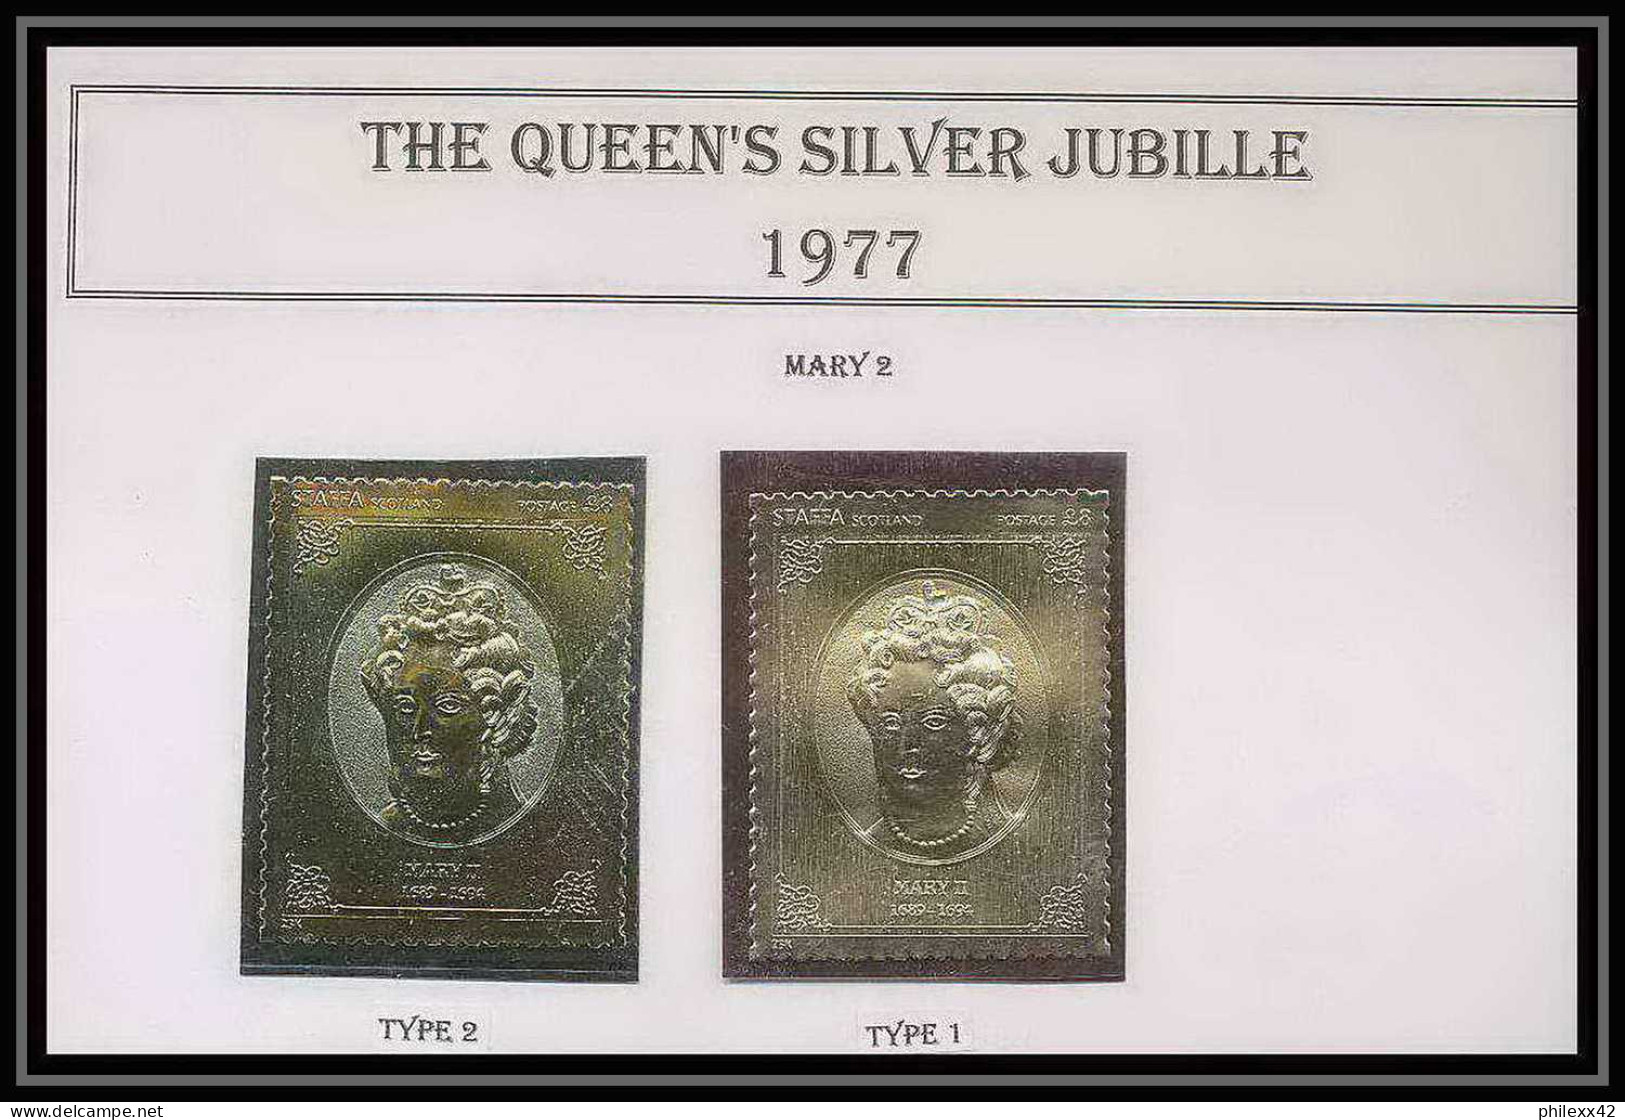 451 Staffa Scotland The Queen's Silver Jubilee 1977 OR Gold Stamps Monarchy United Kingdom Mary 2 Type 1&2 Neuf** Mnh - Emisiones Locales